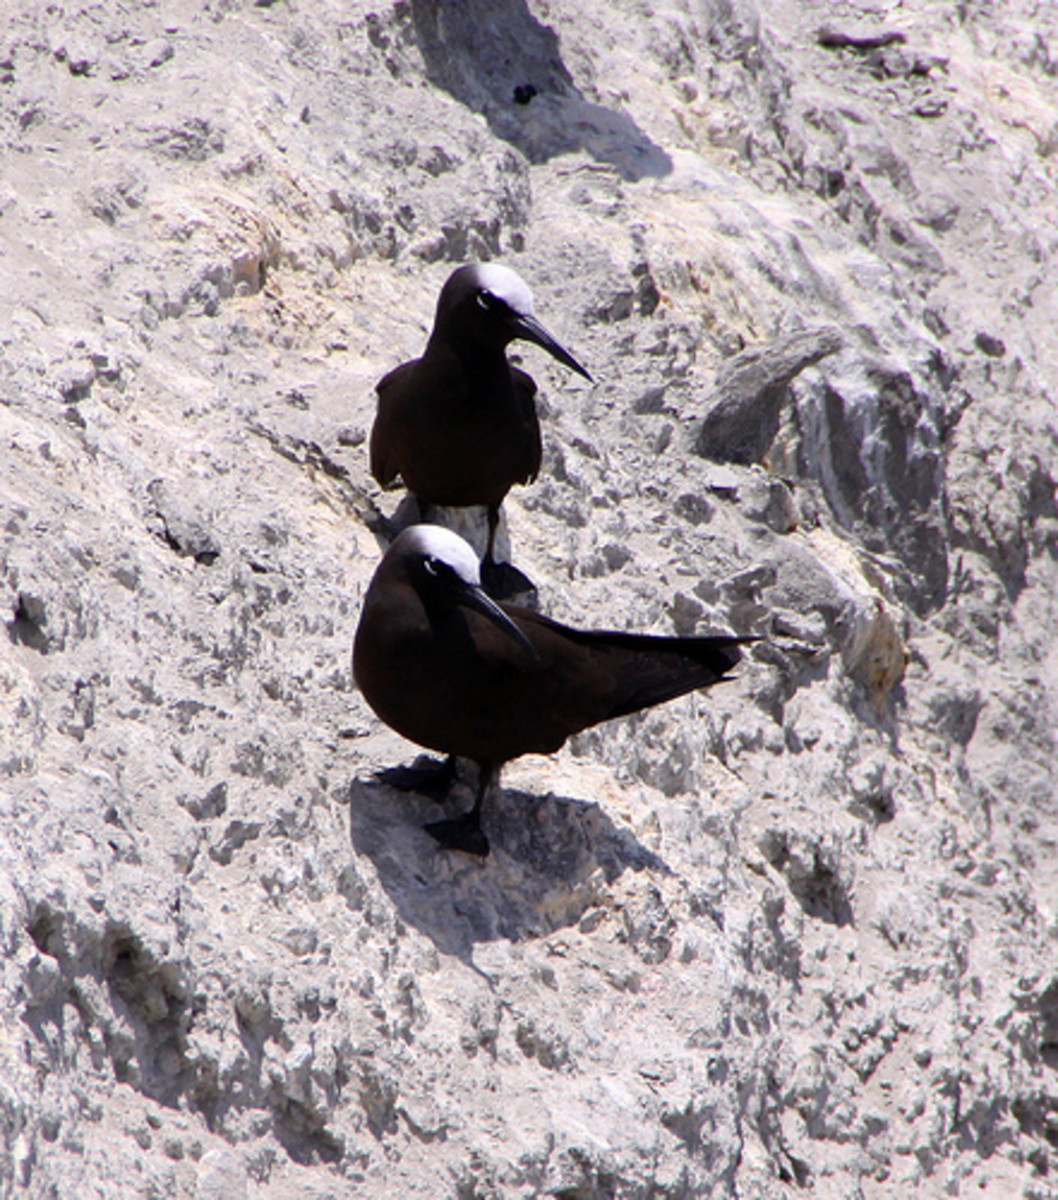 Los Roques is home to Black Noddy (above), and the larger Brown Noddy